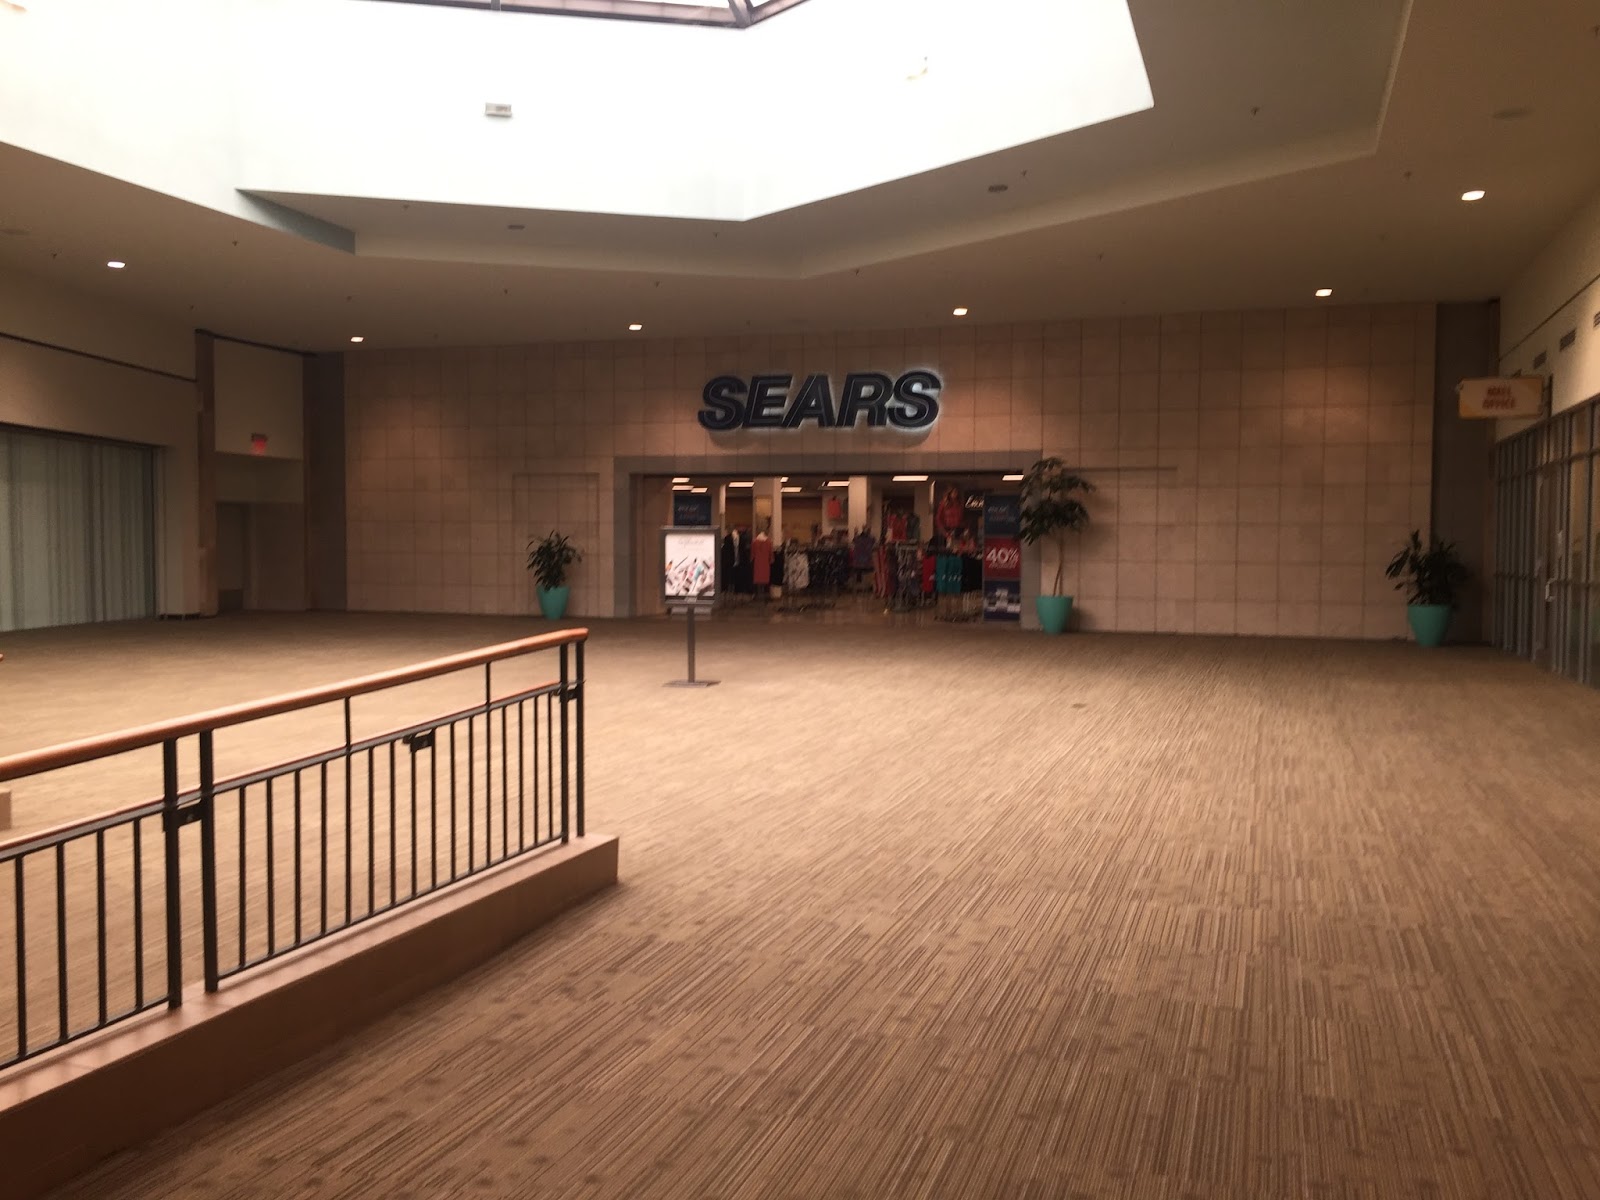 At deserted Georgia Square Mall, memories and speculation about